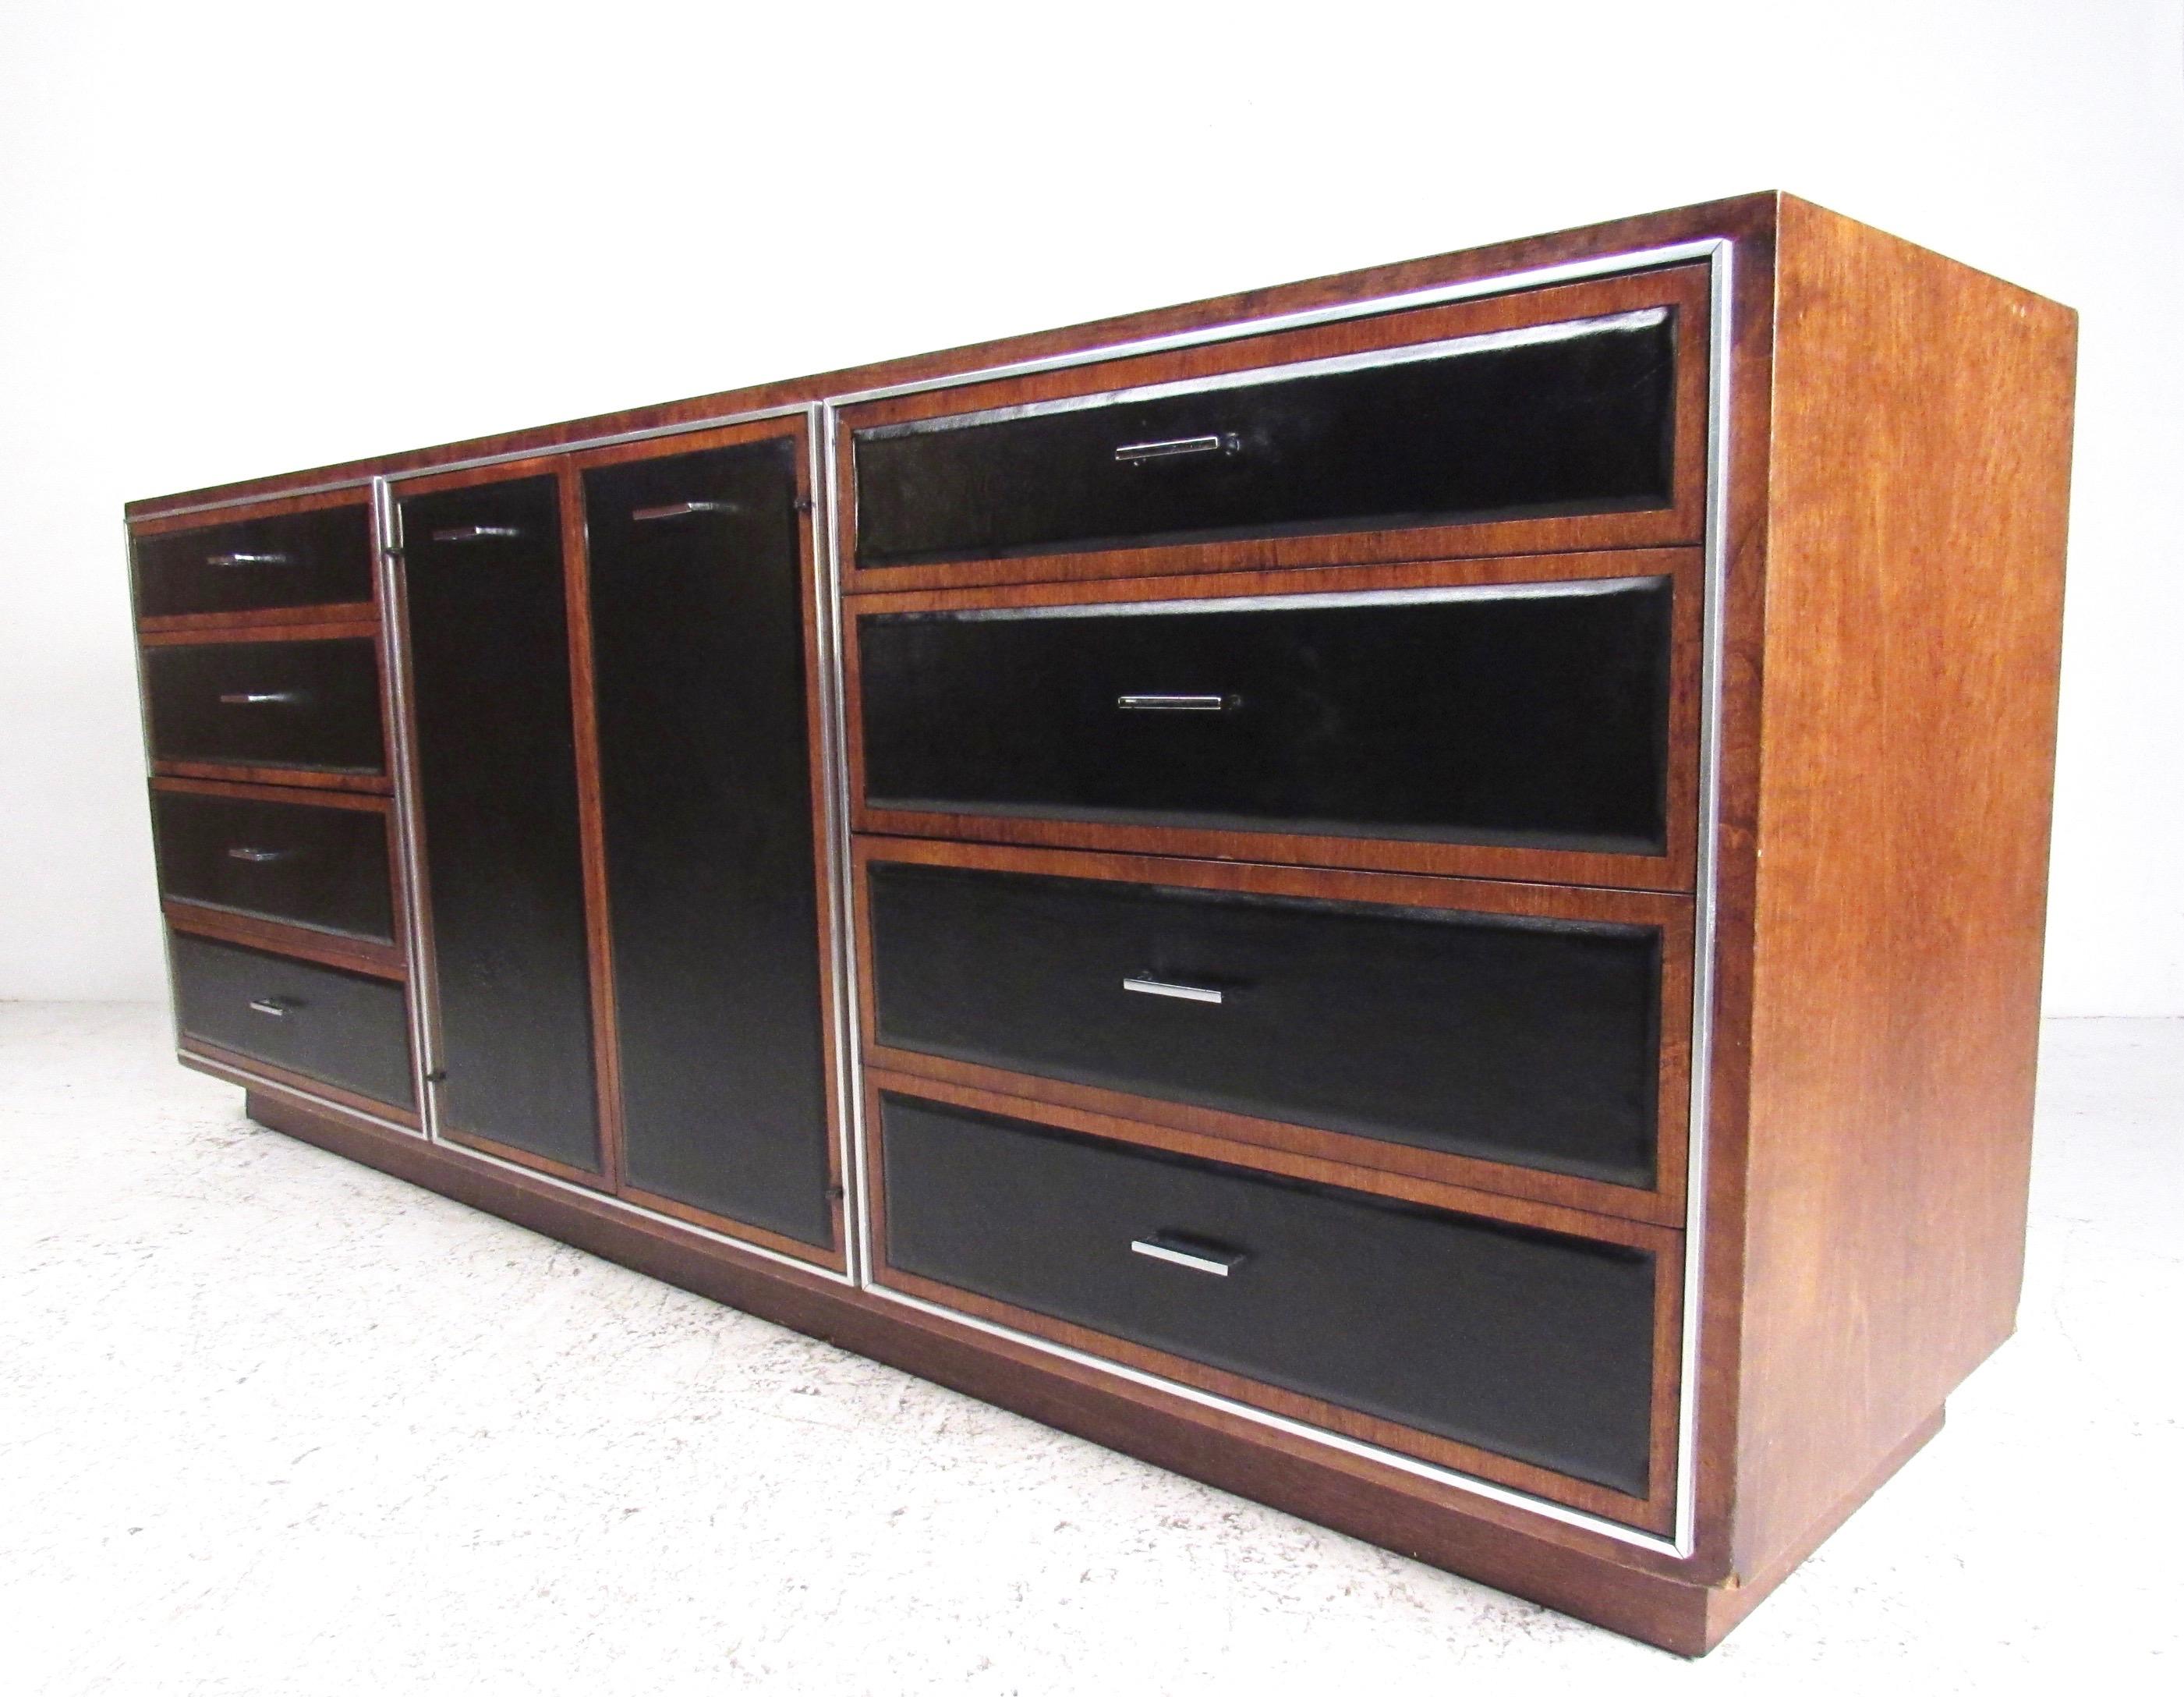 This stylish two-tone vintage bedroom dresser features rich wood finish mixed with black leatherette door fronts. Accented by chrome handles and offering nine spacious drawers for storage this long low Mid-Century Modern dresser makes a substantial